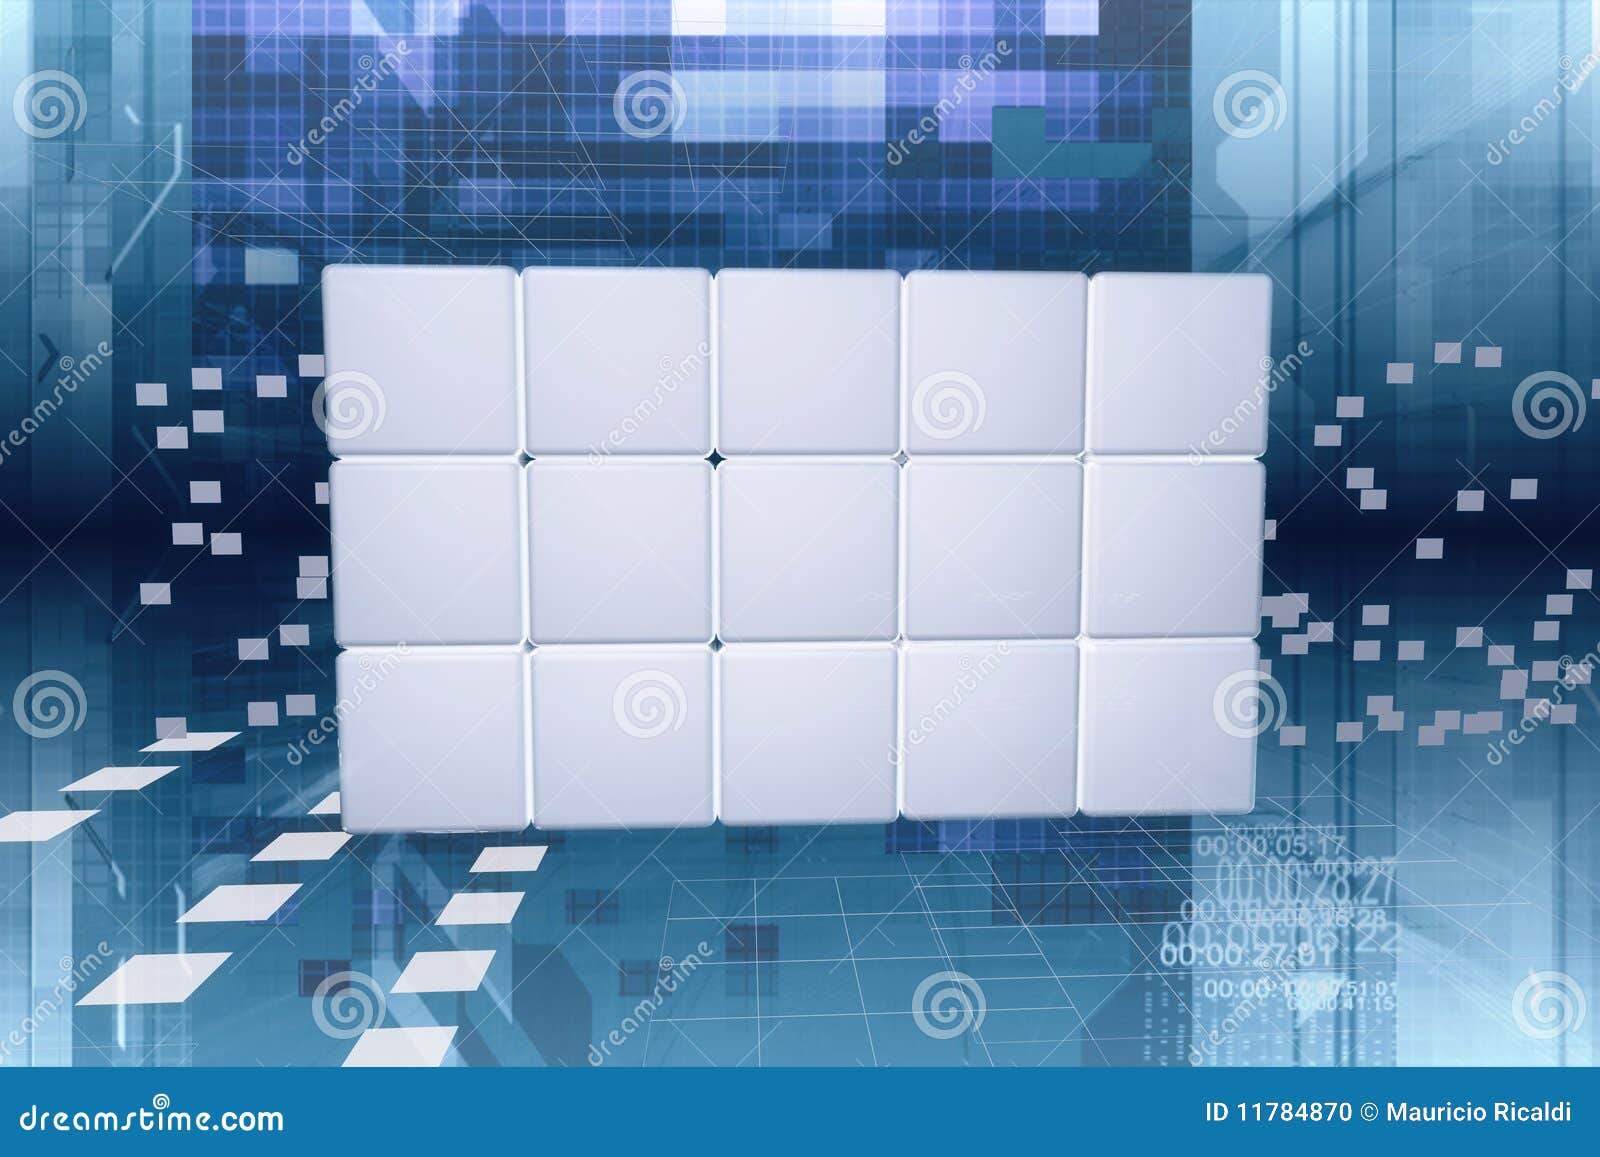 data panel in the cyberspace